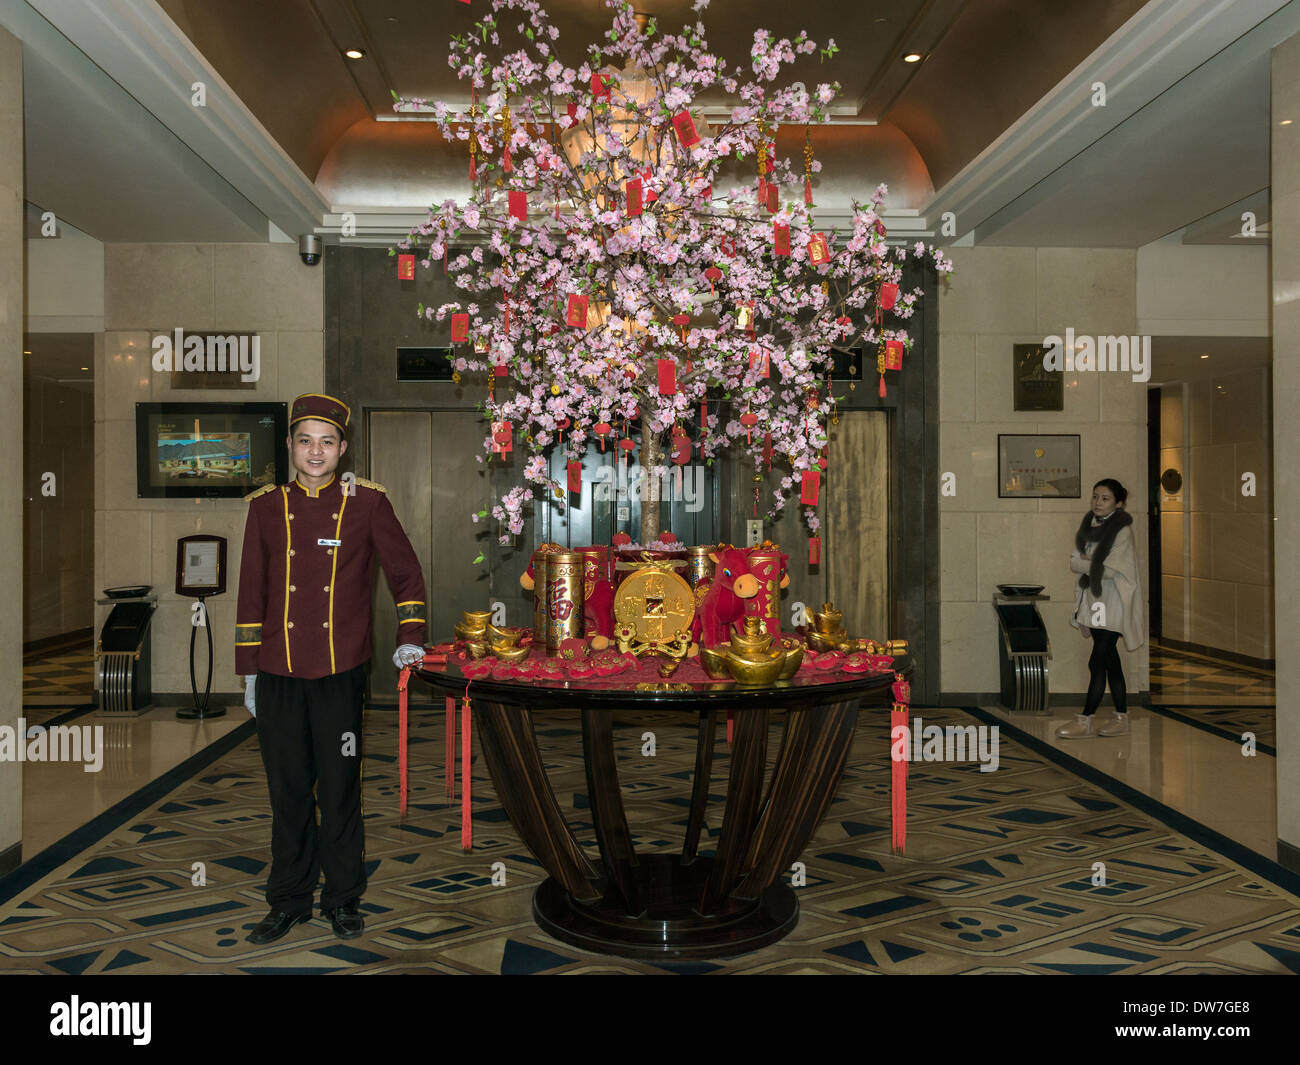 Chinese New Year Decoration 2018 @ The Waterfront Hotel - Spiral